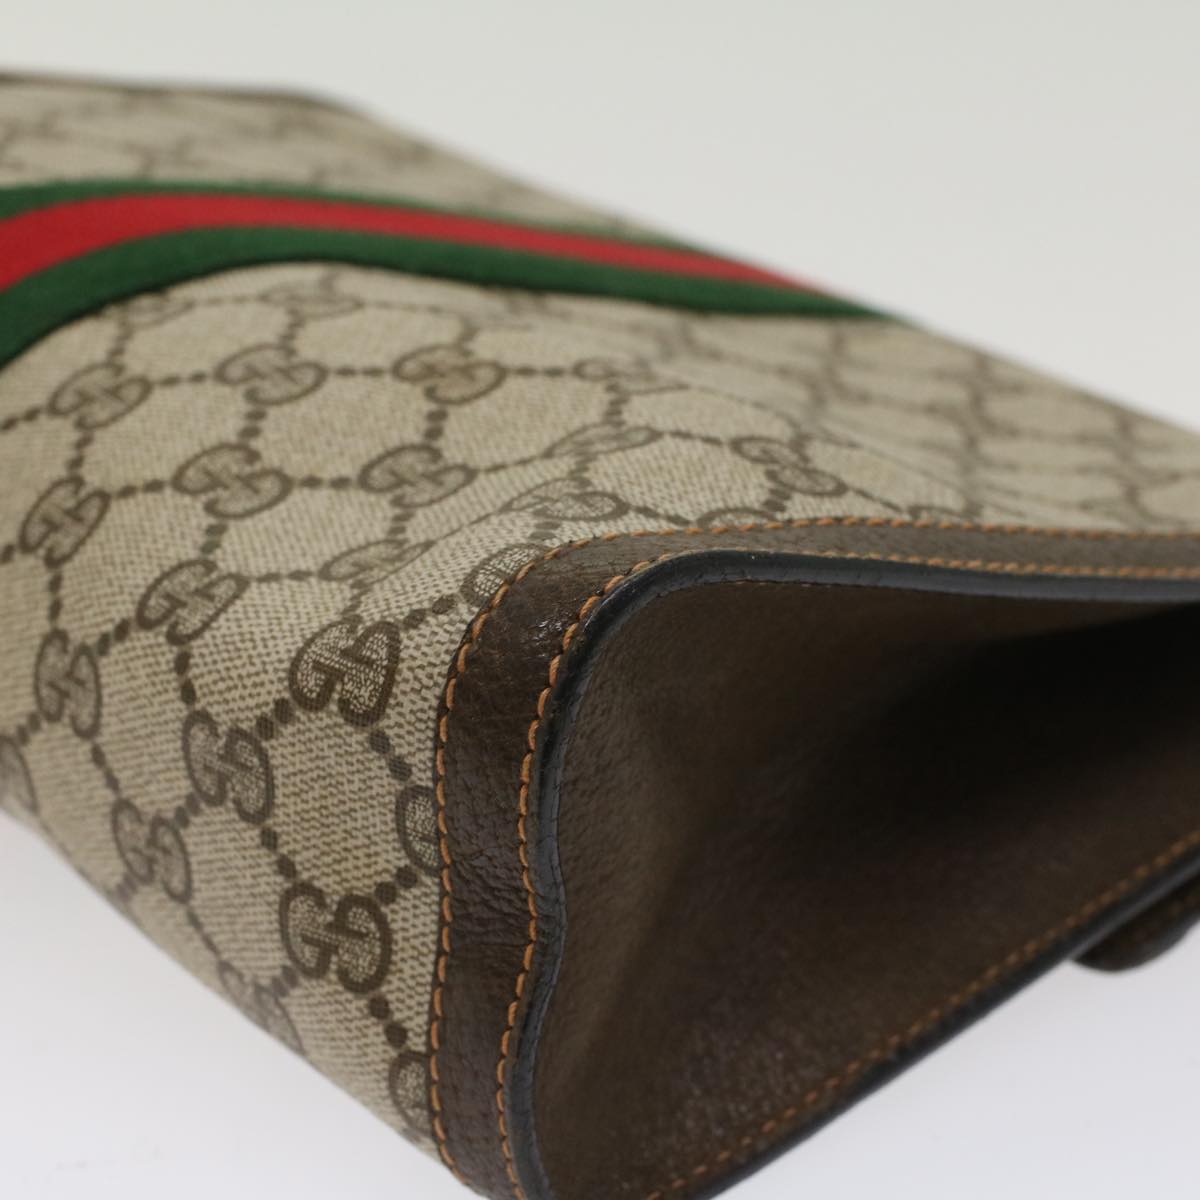 GUCCI GG Canvas Web Sherry Line Clutch Bag Beige Red Green 84.01.007 Auth yk7987